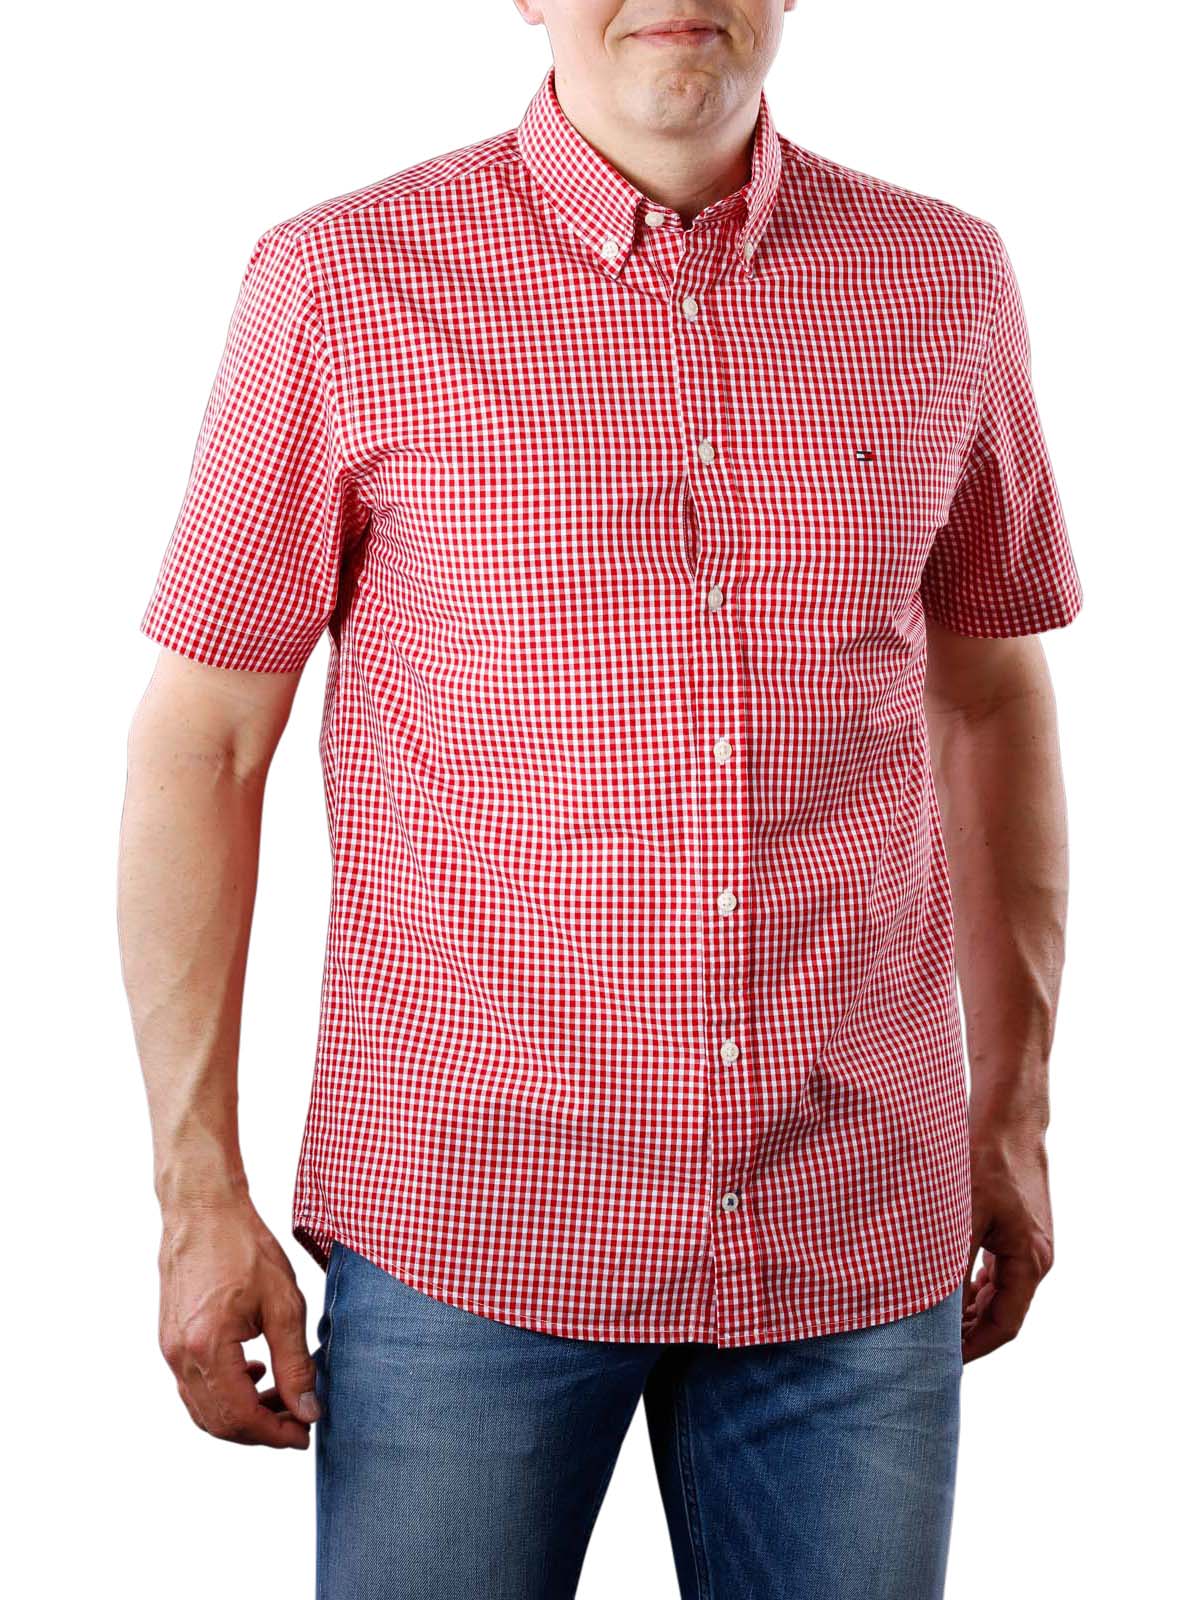 red and white tommy shirt